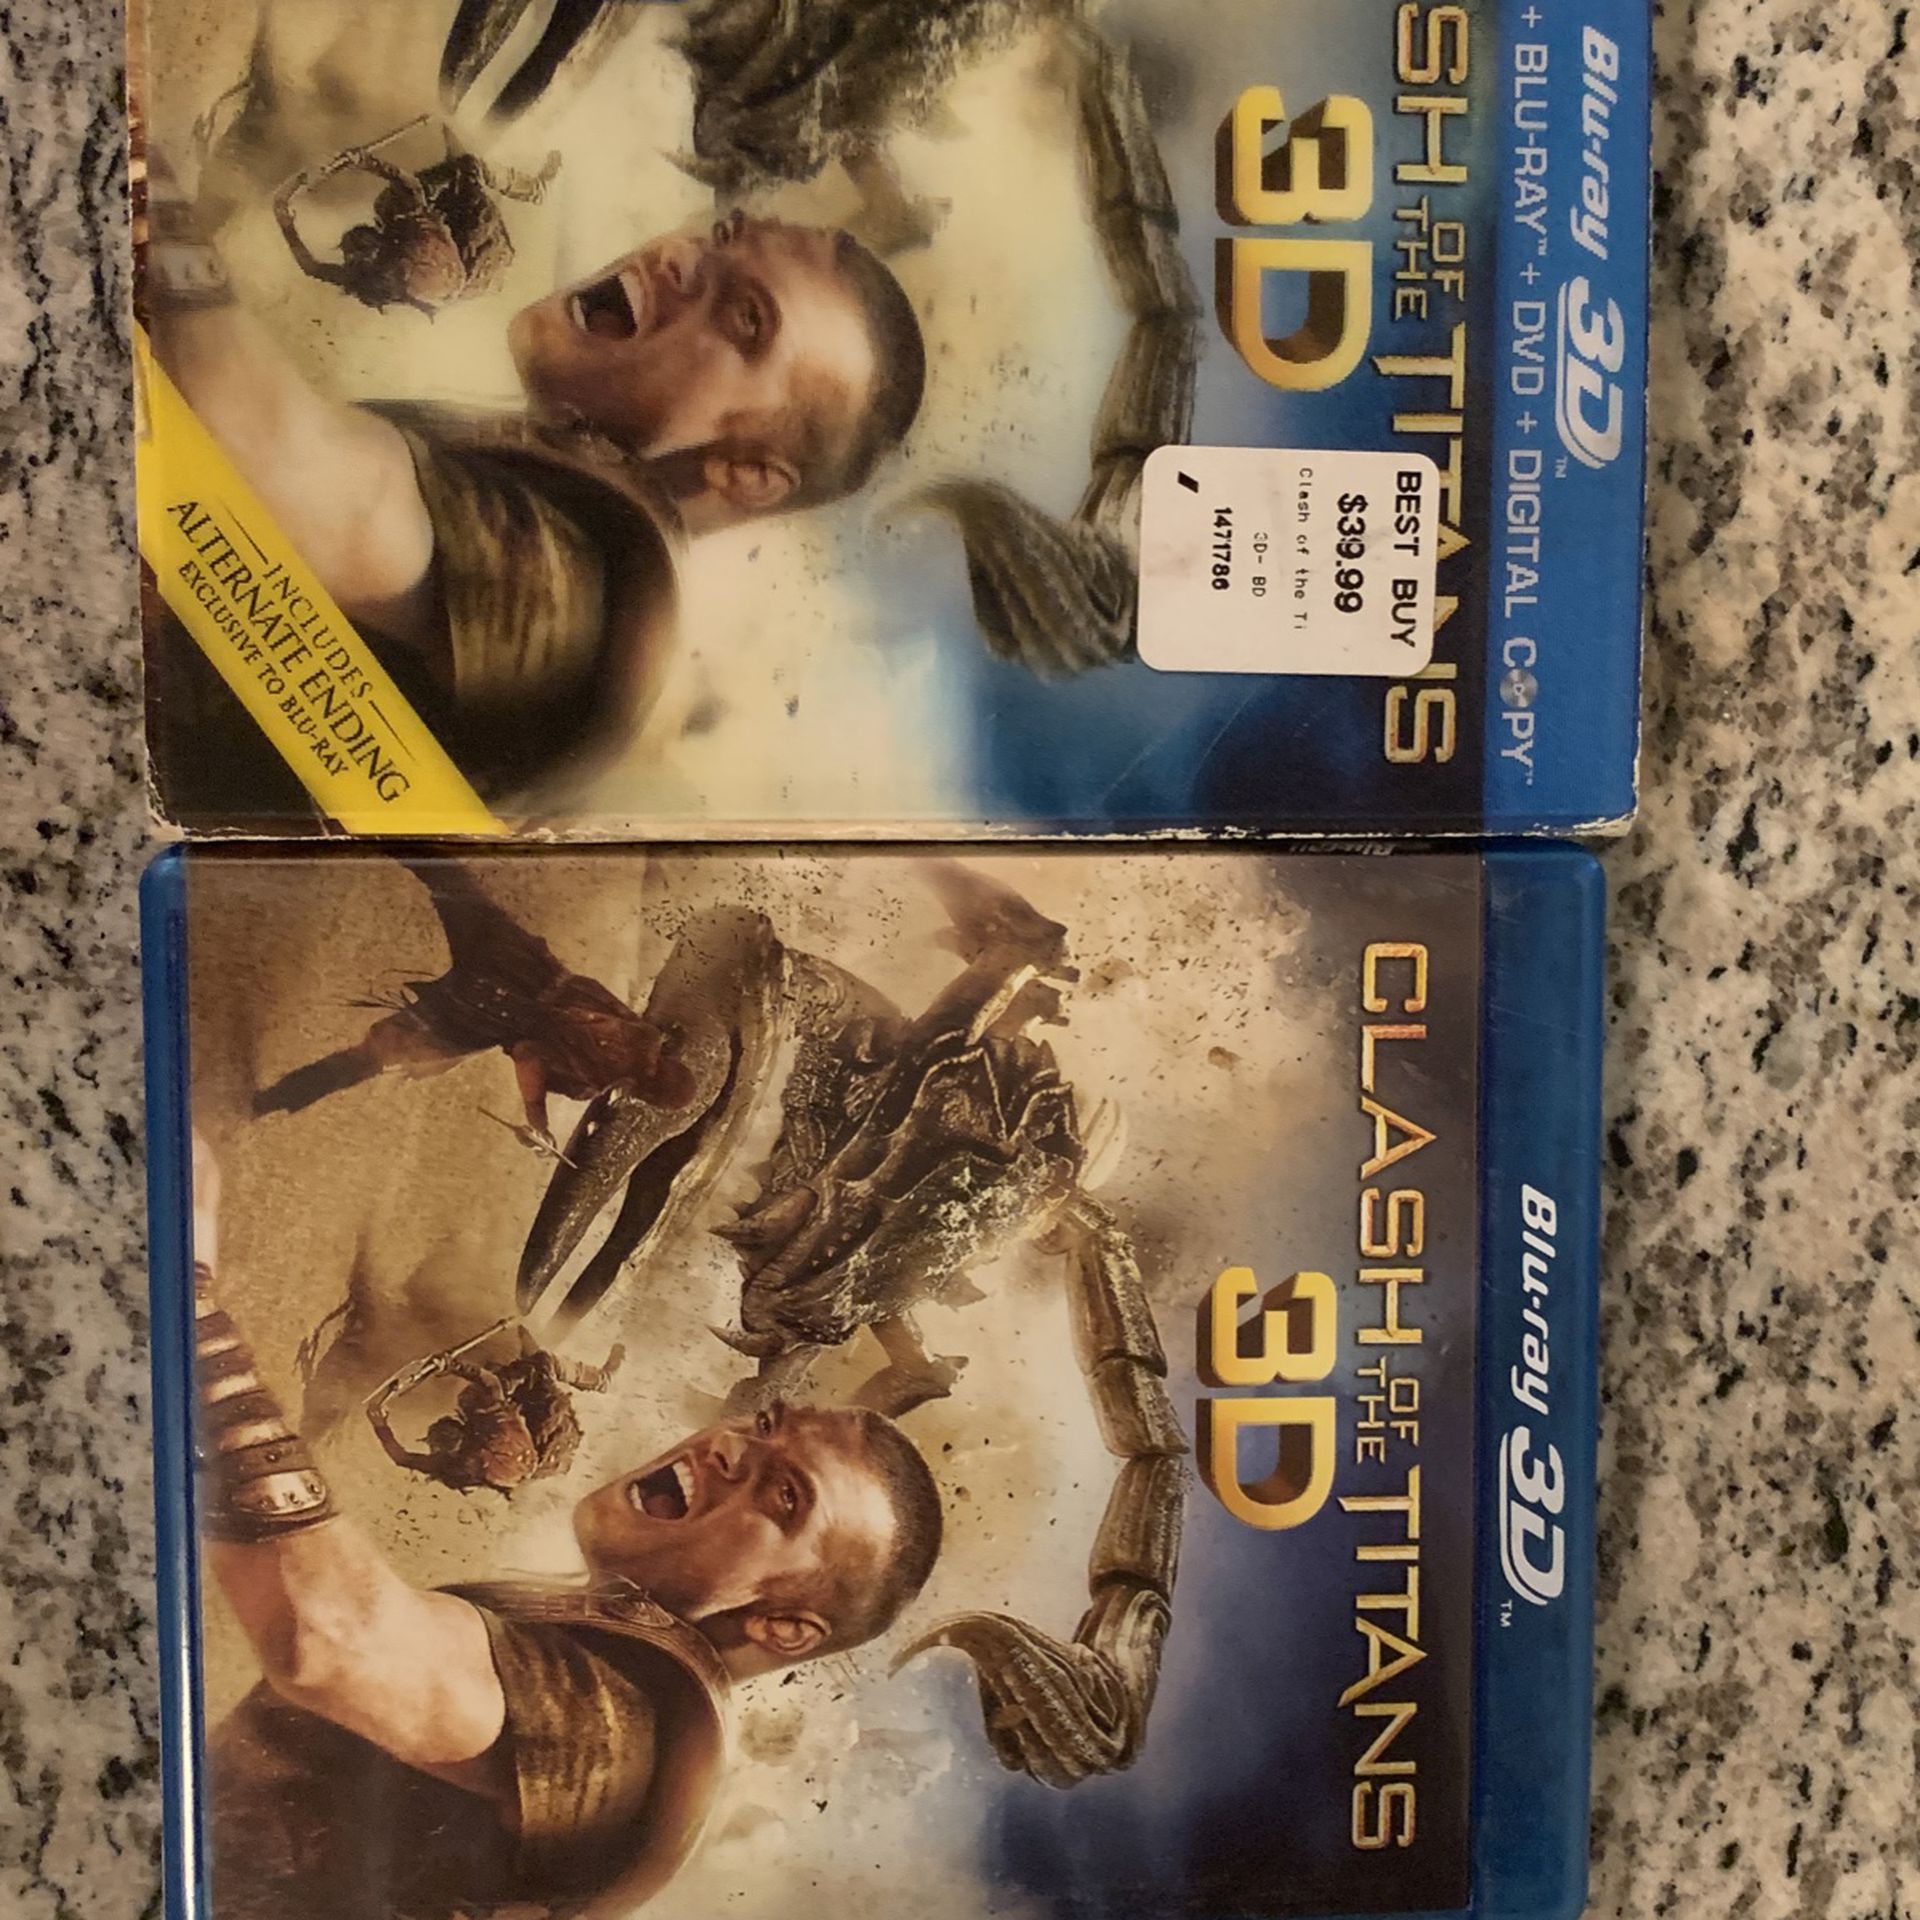 2010 Clash Of The Titans 3D Blu-Ray